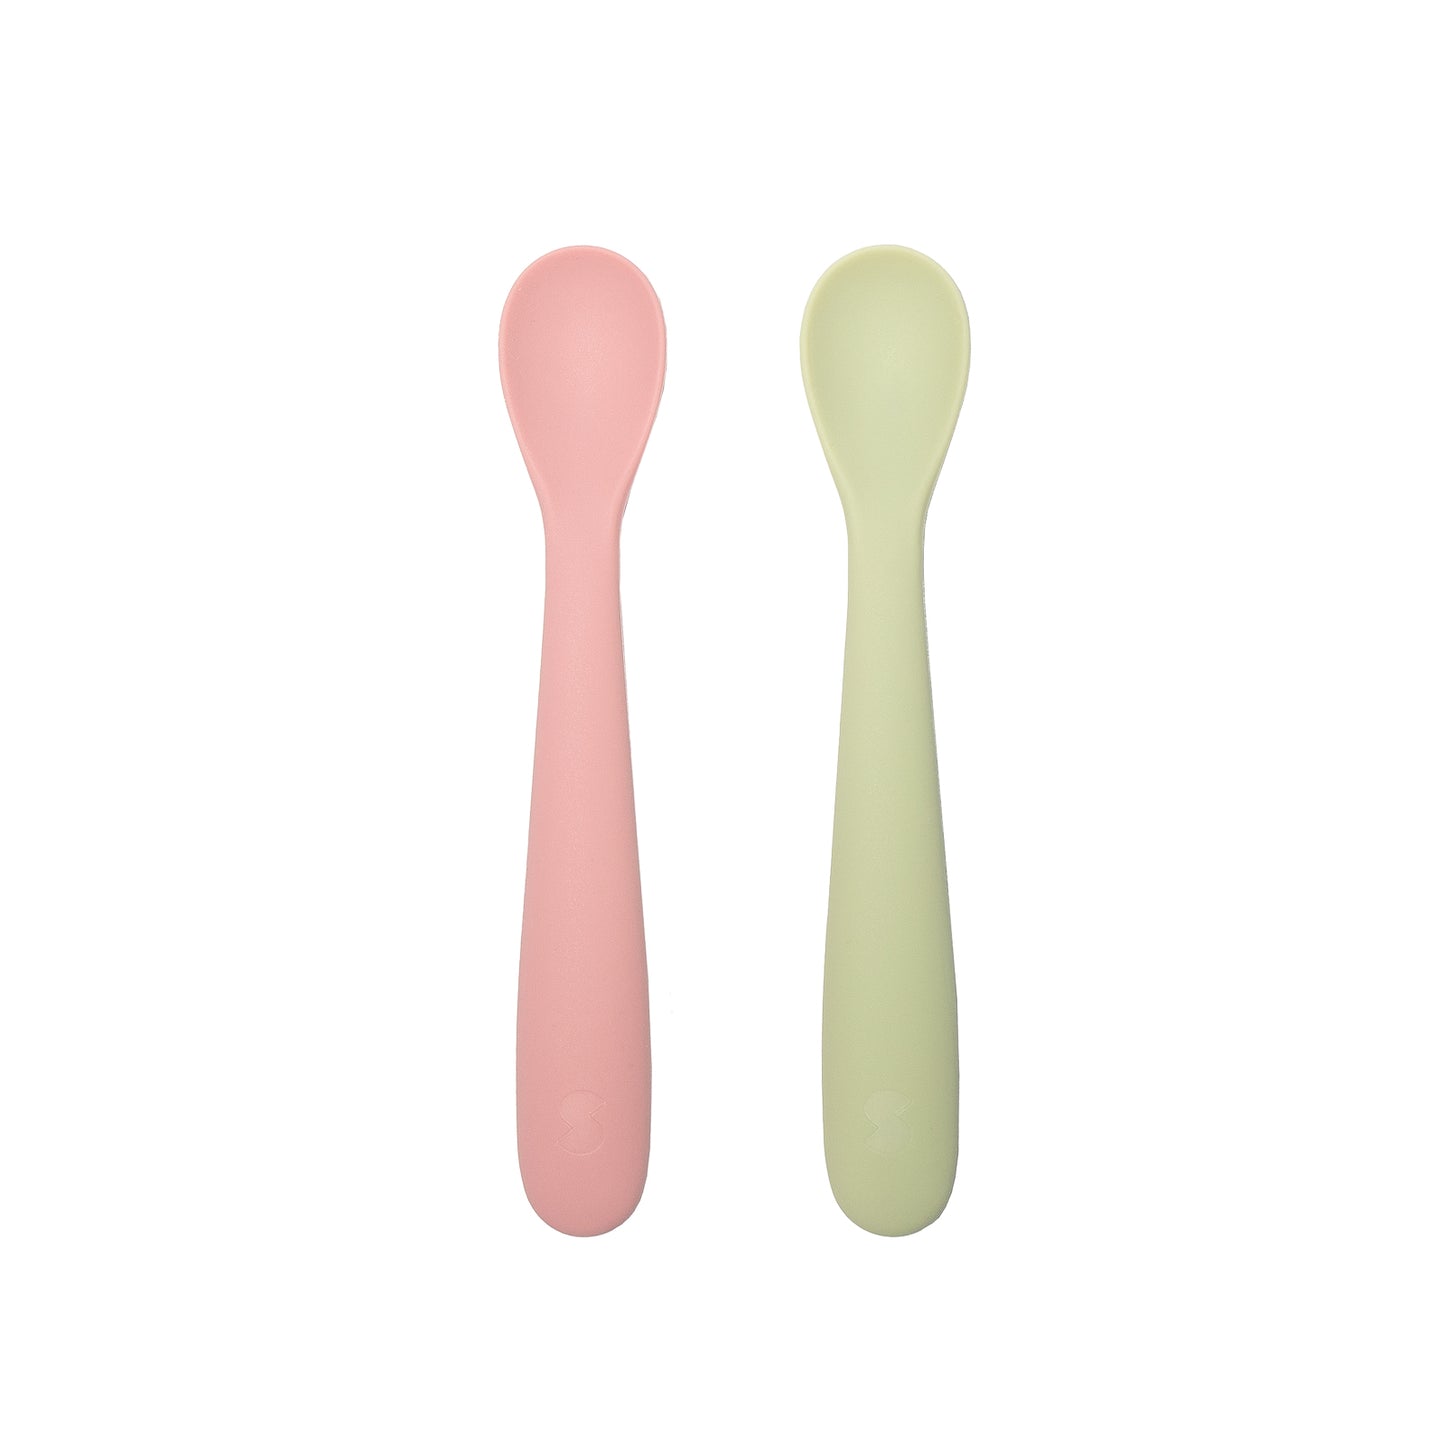 Silicon Weaning Spoon